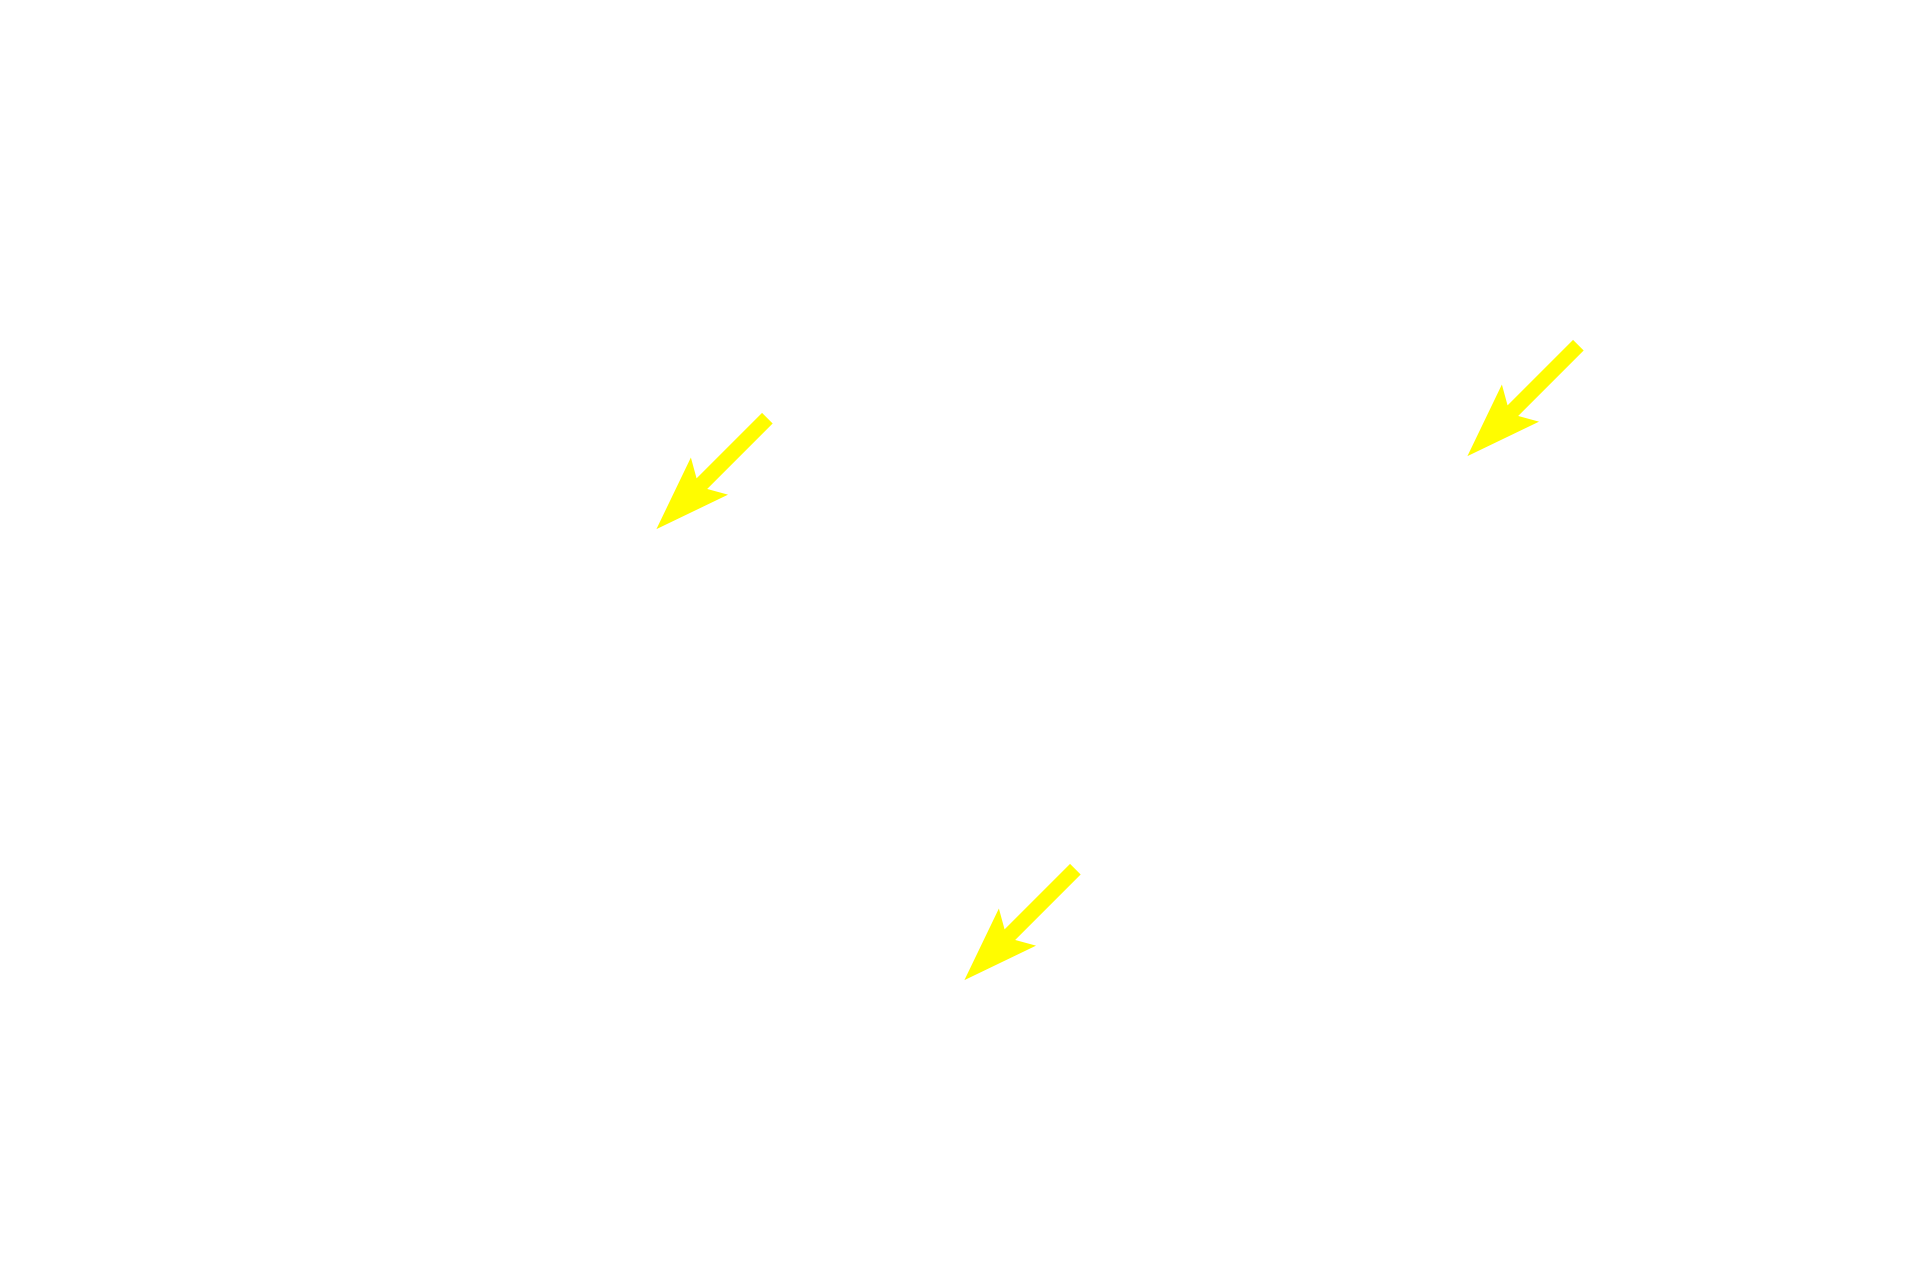  - Nuclei <p>Several pseudounipolar neurons are seen in this image.  Pseudounipolar neuron cell bodies vary in size, a feature that correlates with the type of sensory information each neuron conveys.  Each cell body is surrounded by satellite Schwann cells which form a capsule.  750x</p>
